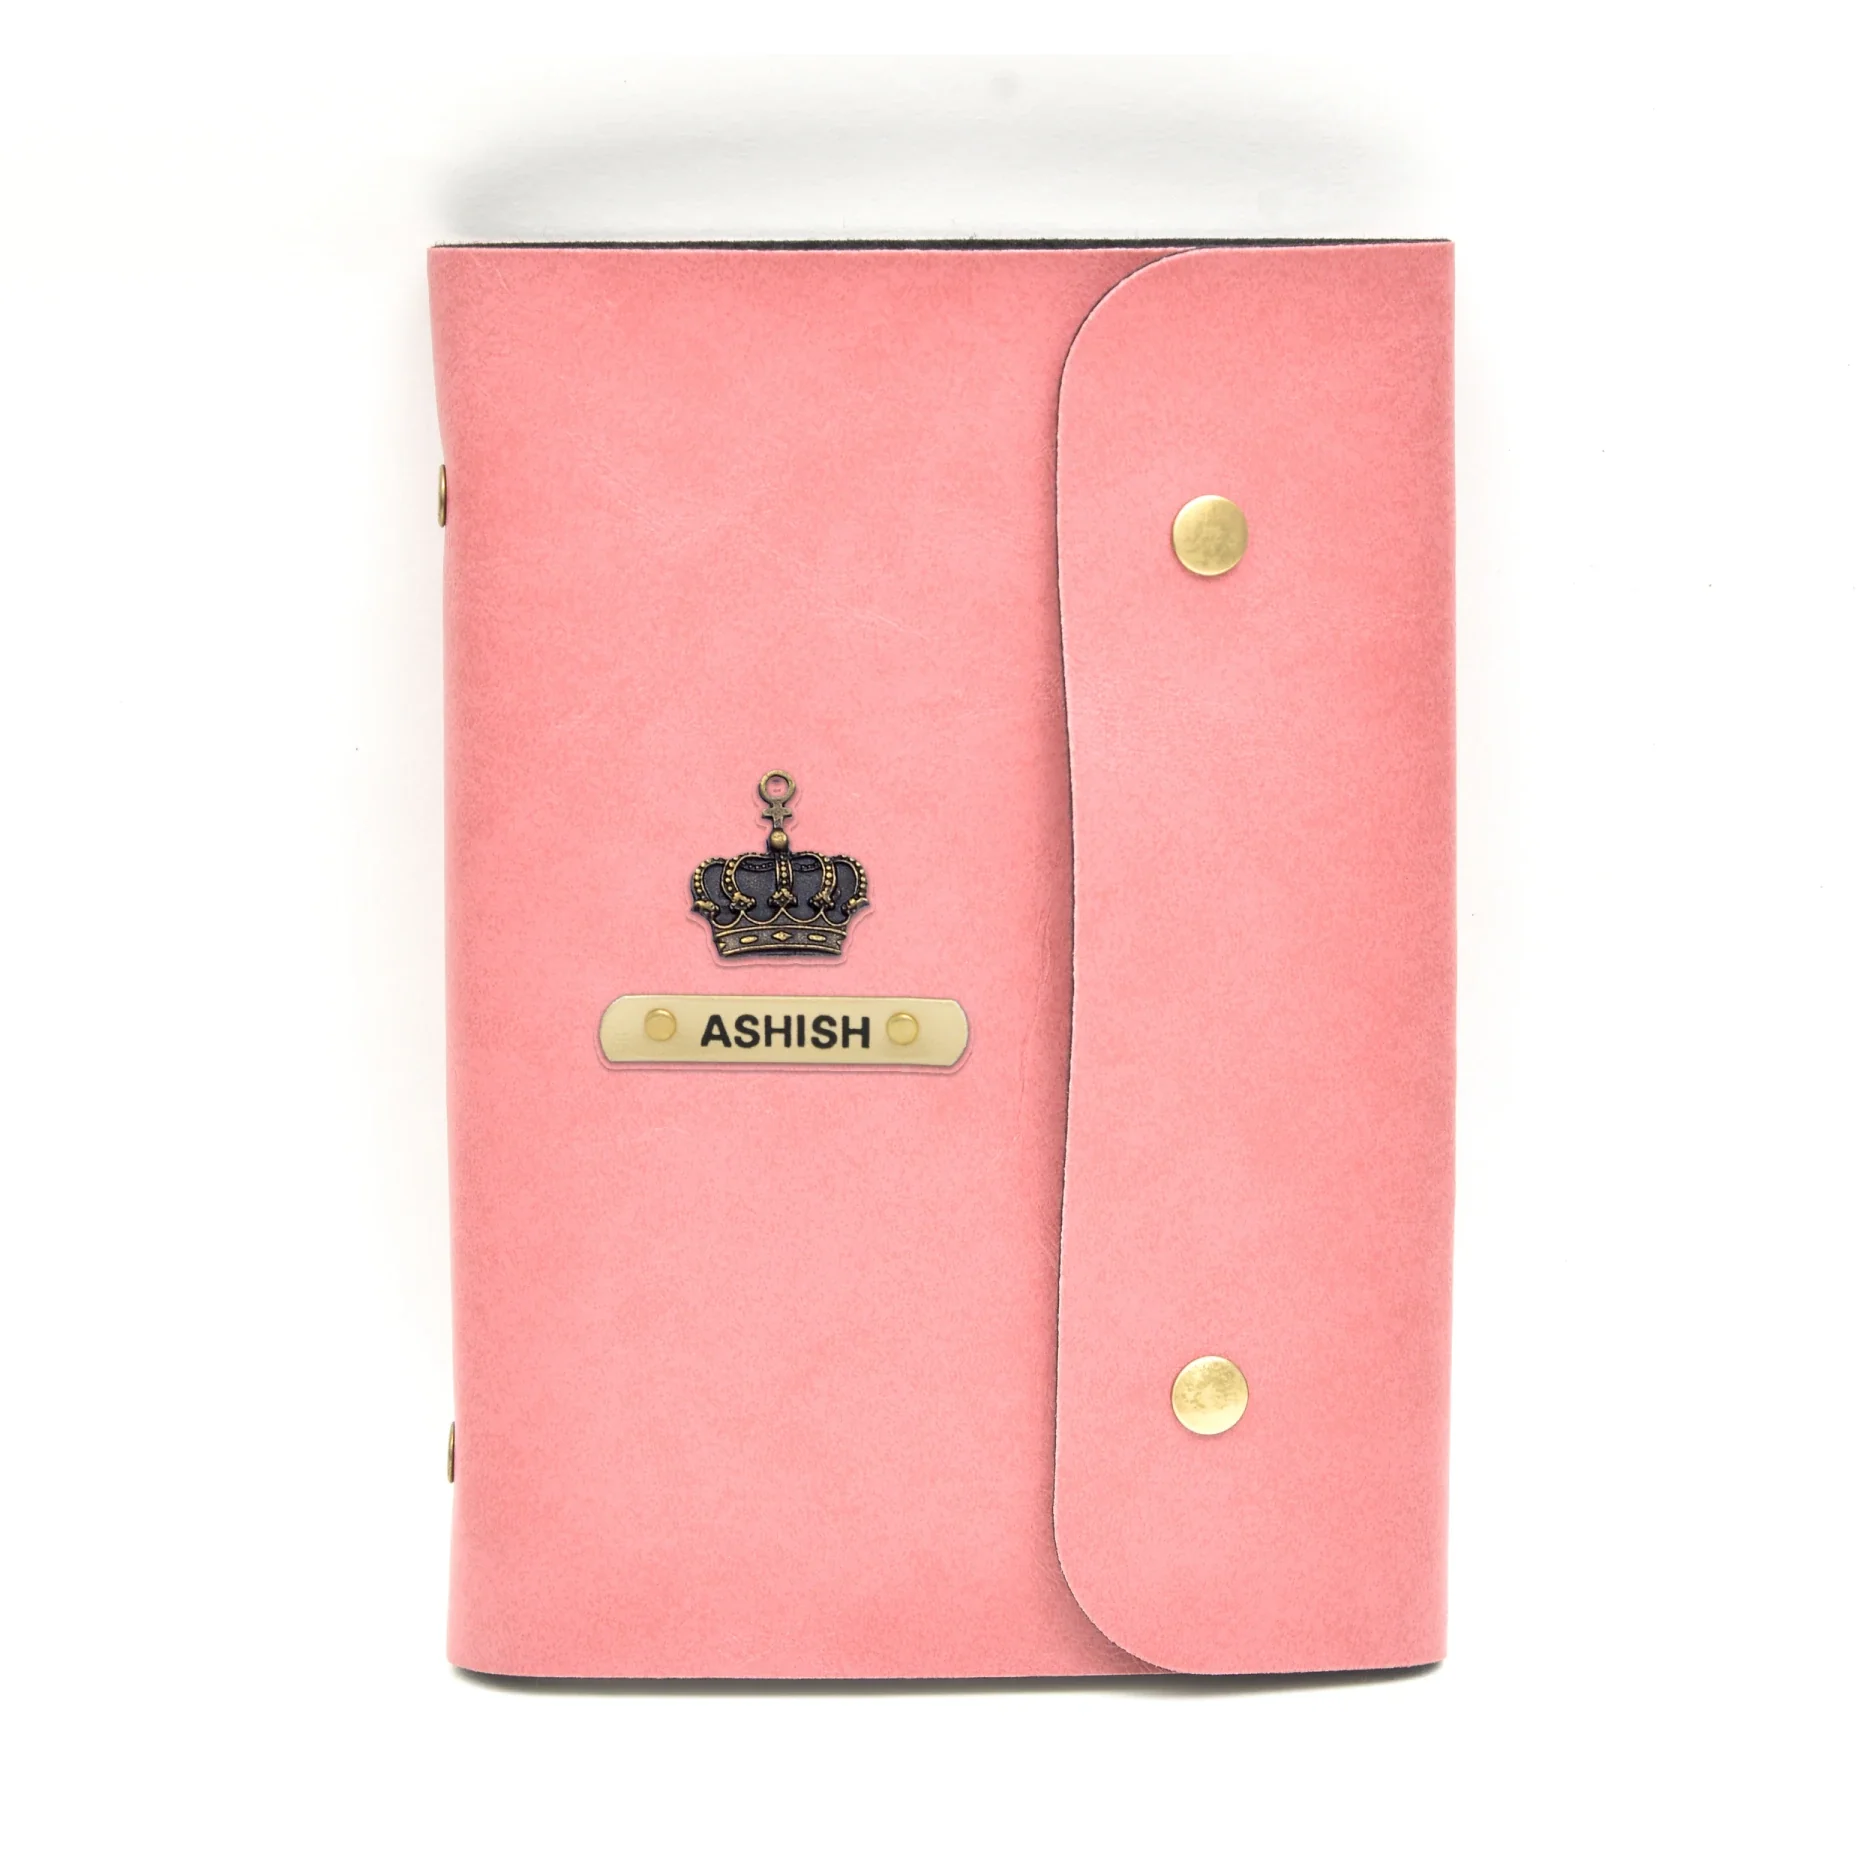 Our personalized leather buttoned diary is the perfect way to capture your thoughts and ideas. With a range of designs to choose from, you can find the one that reflects your personality.